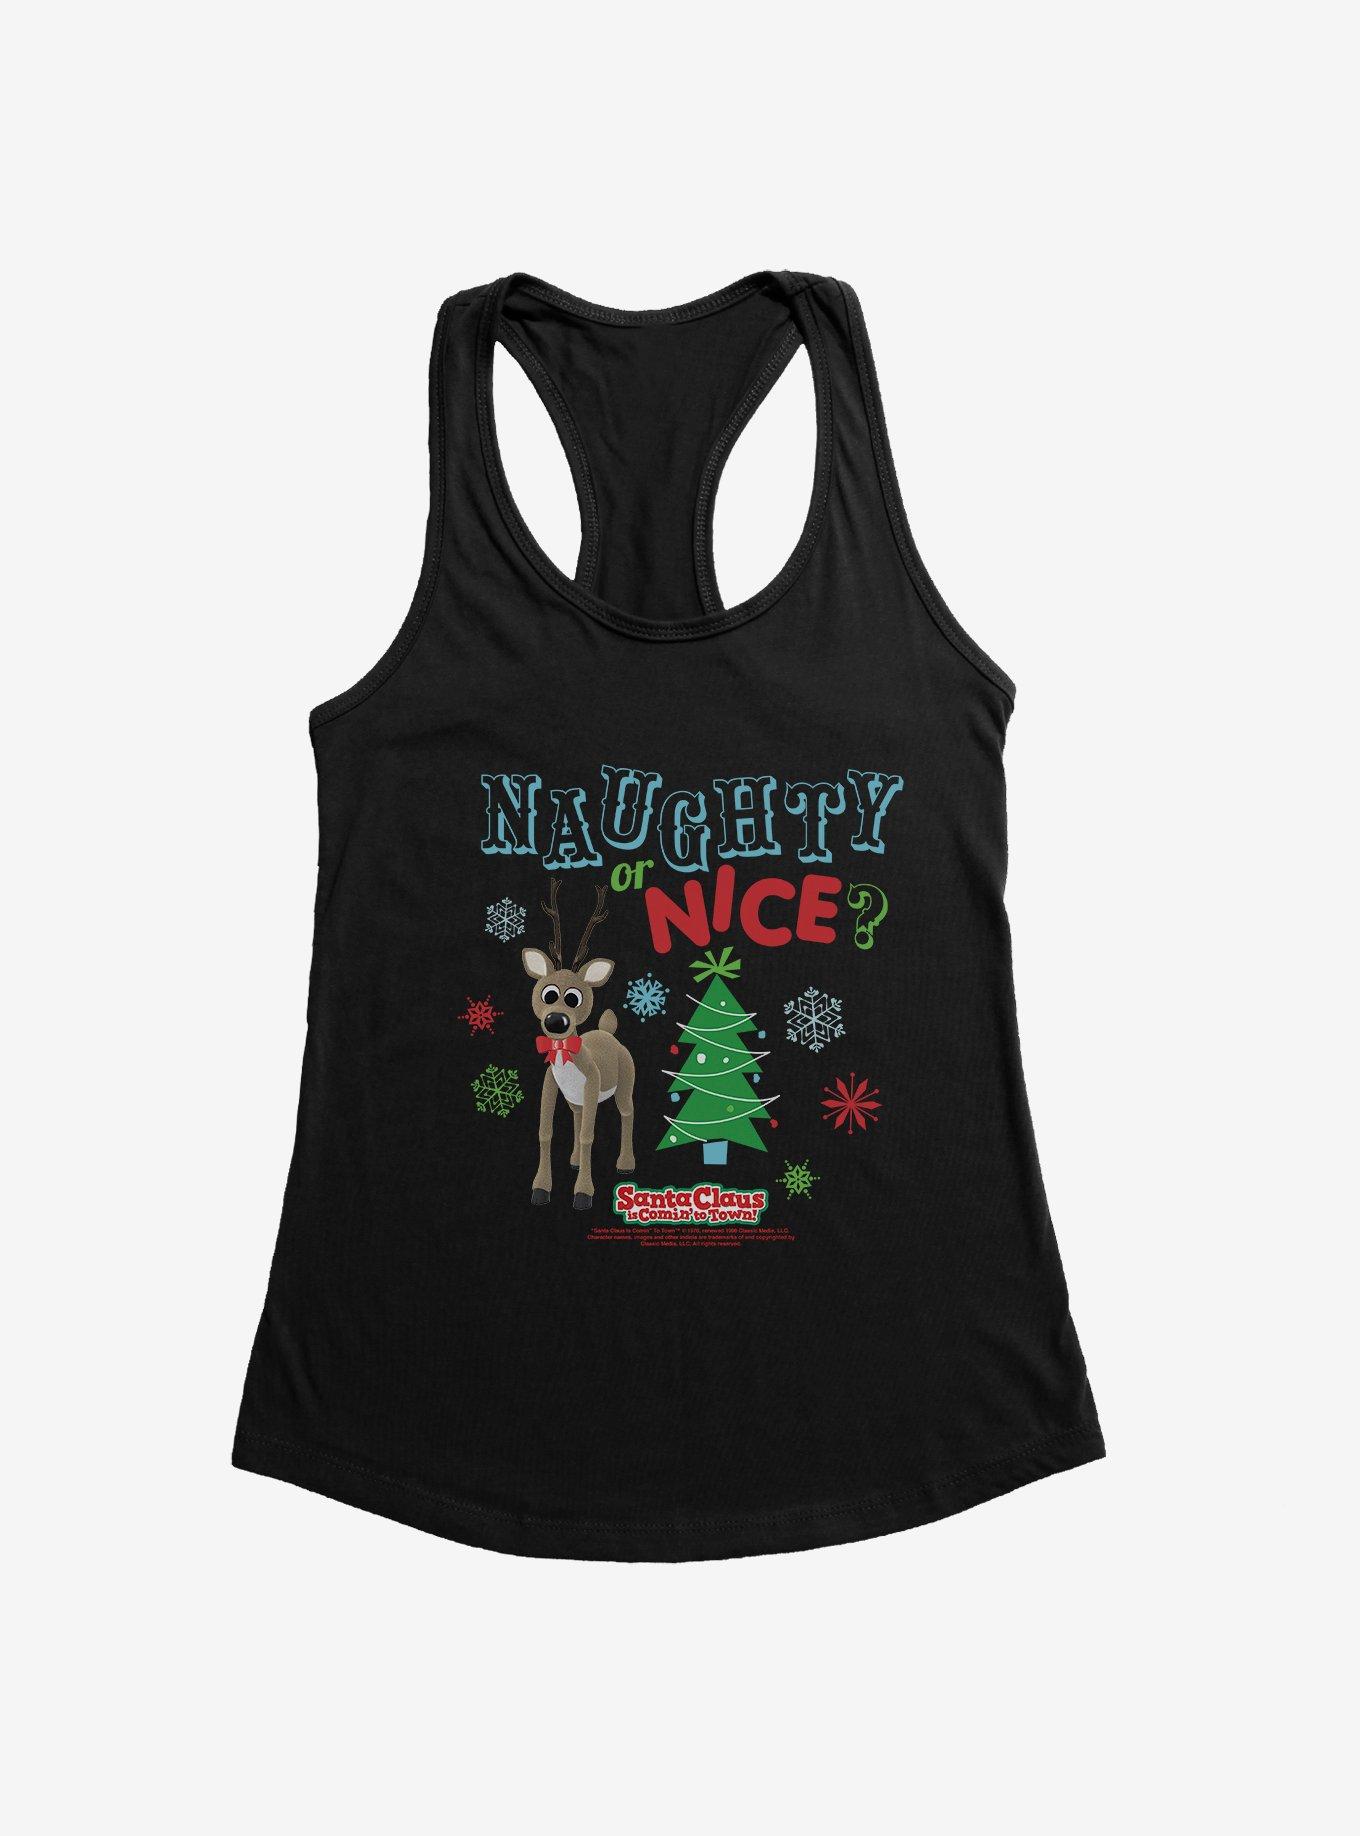 Santa Claus Is Comin' To Town! Naughty Or Nice? Girls Tank, , hi-res